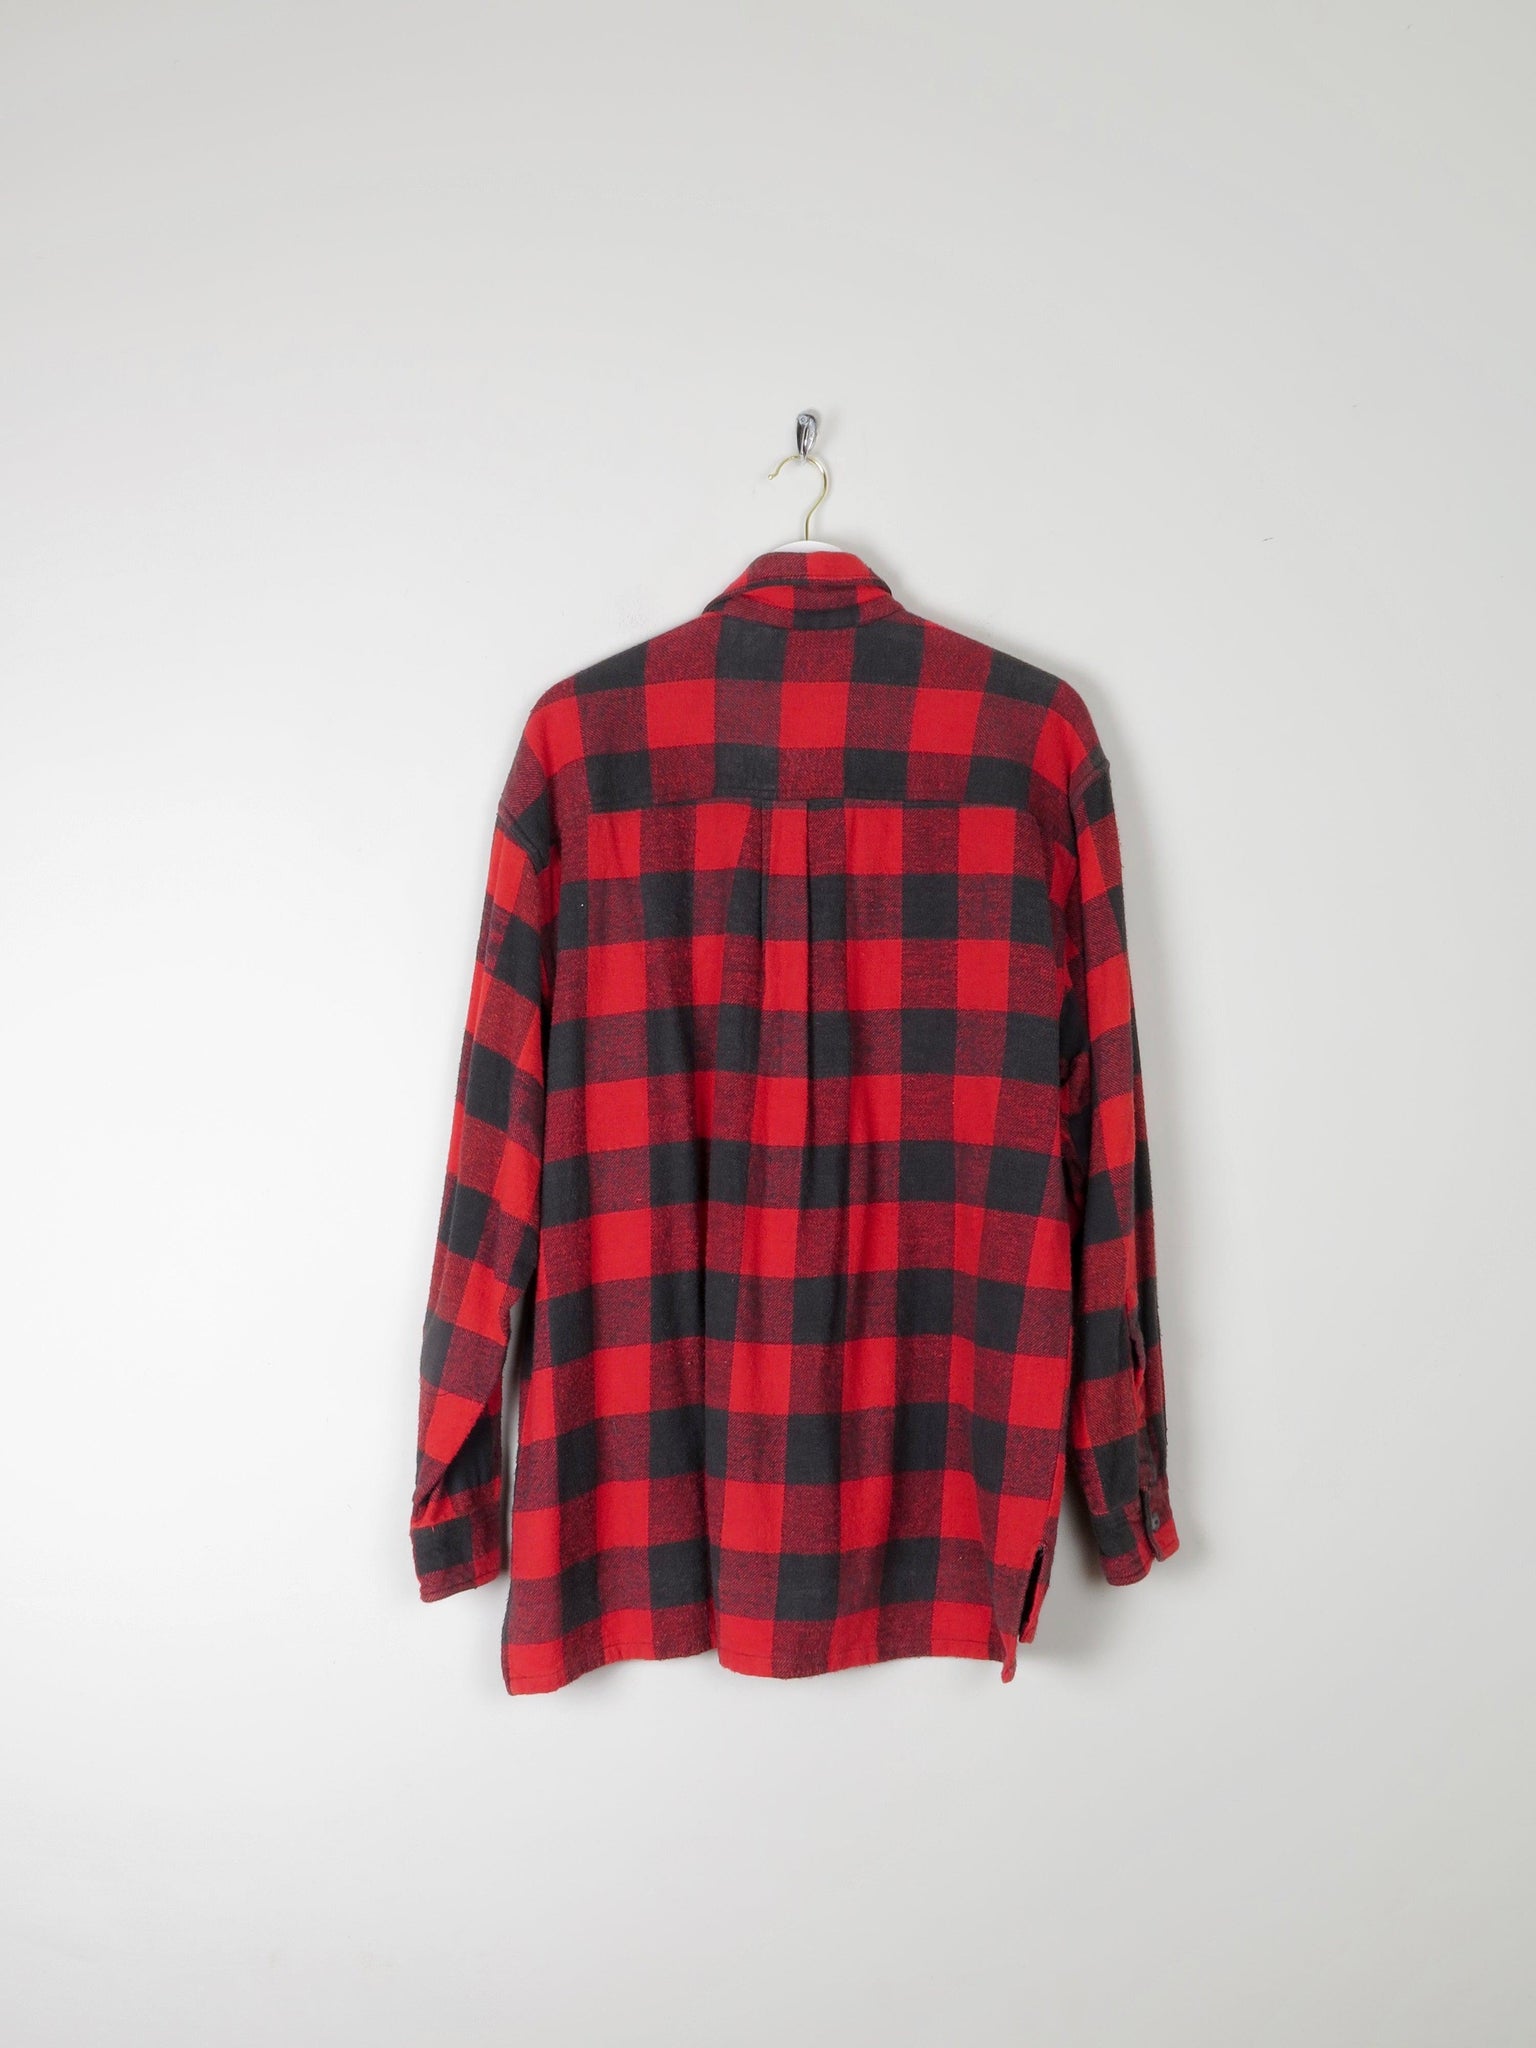 Men's Red & Black Flannel Shirt With Zip L - The Harlequin